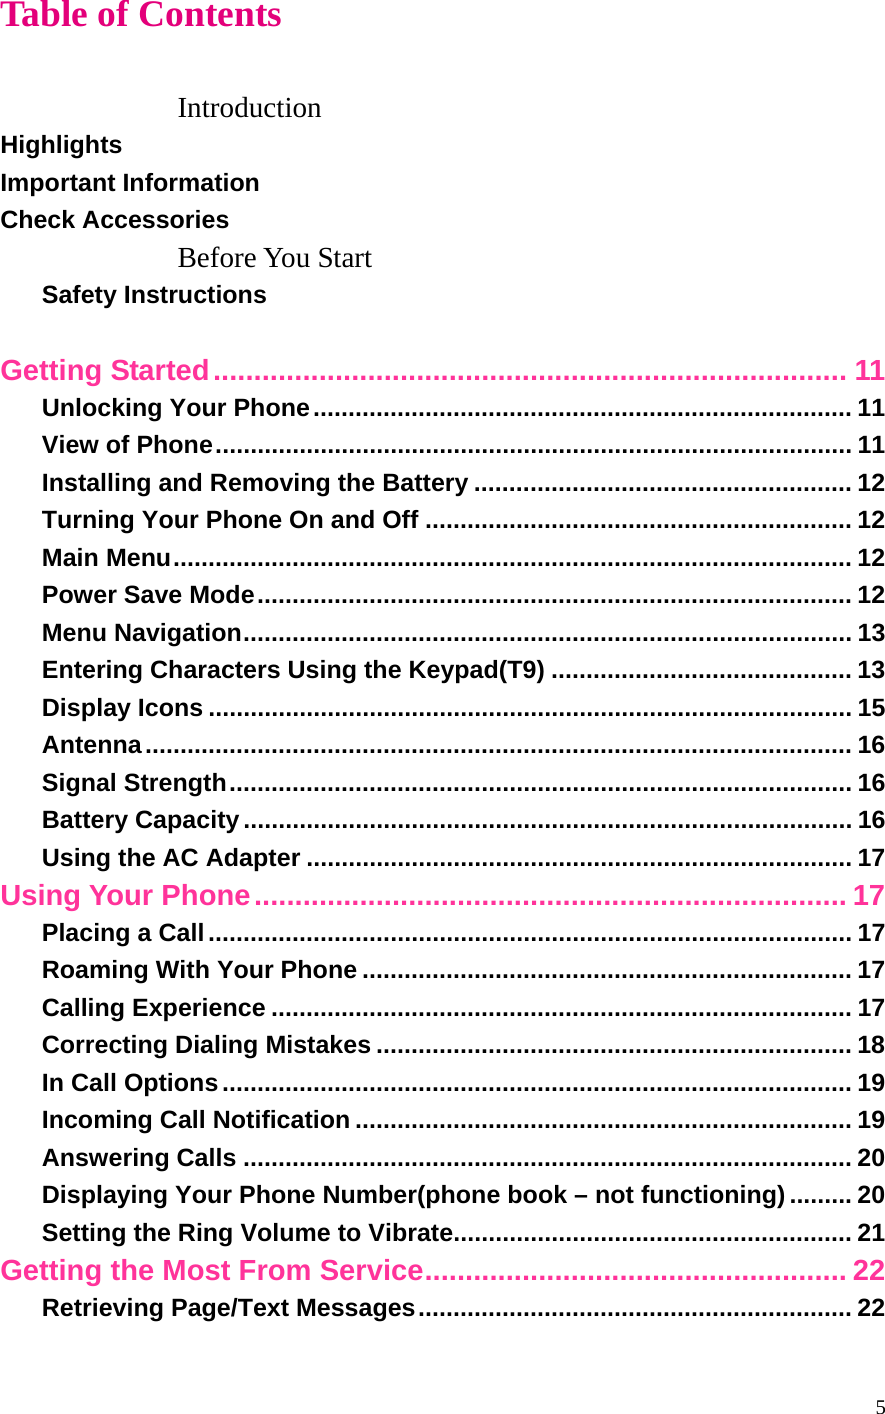 5 Table of Contents  Introduction Highlights Important Information Check Accessories Before You Start Safety Instructions  Getting Started.............................................................................. 11 Unlocking Your Phone............................................................................. 11 View of Phone........................................................................................... 11 Installing and Removing the Battery ...................................................... 12 Turning Your Phone On and Off ............................................................. 12 Main Menu................................................................................................. 12 Power Save Mode..................................................................................... 12 Menu Navigation....................................................................................... 13 Entering Characters Using the Keypad(T9) ........................................... 13 Display Icons ............................................................................................ 15 Antenna..................................................................................................... 16 Signal Strength......................................................................................... 16 Battery Capacity....................................................................................... 16 Using the AC Adapter .............................................................................. 17 Using Your Phone......................................................................... 17 Placing a Call............................................................................................ 17 Roaming With Your Phone ...................................................................... 17 Calling Experience ................................................................................... 17 Correcting Dialing Mistakes .................................................................... 18 In Call Options.......................................................................................... 19 Incoming Call Notification ....................................................................... 19 Answering Calls ....................................................................................... 20 Displaying Your Phone Number(phone book – not functioning)......... 20 Setting the Ring Volume to Vibrate......................................................... 21 Getting the Most From Service.................................................... 22 Retrieving Page/Text Messages.............................................................. 22 